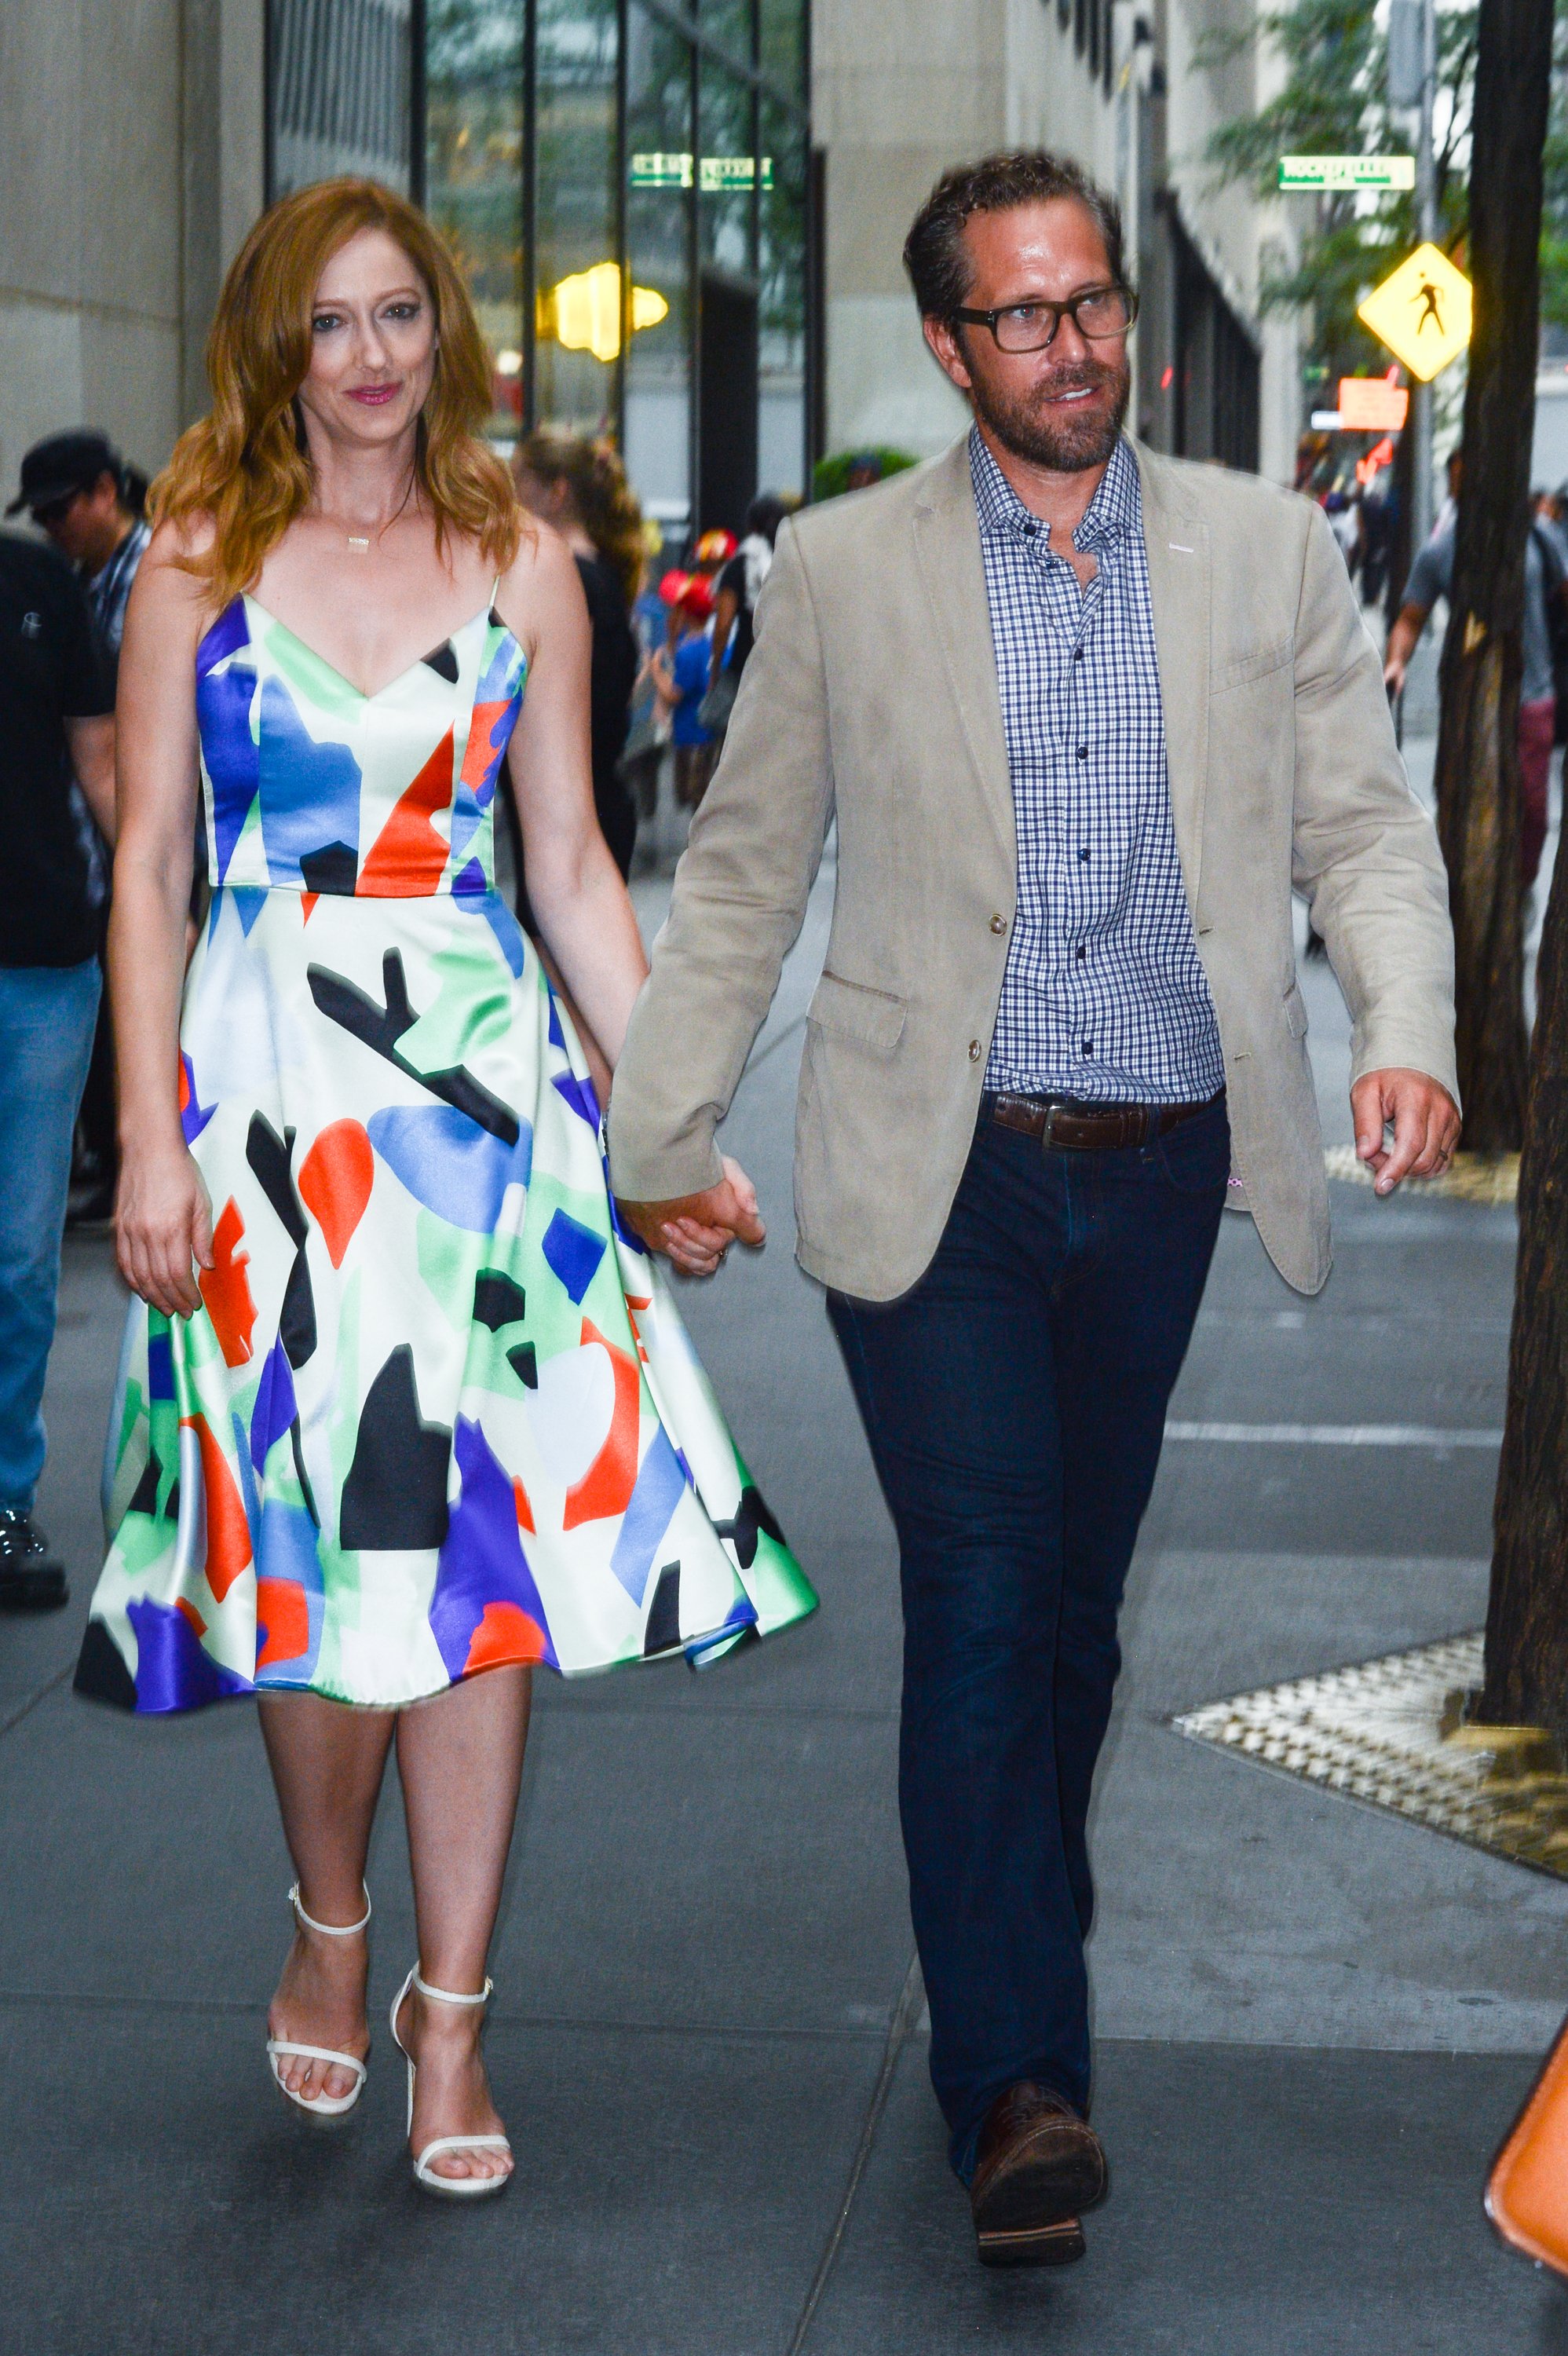 Judy Greer and Dean E. Johnsen at the NBC Rockefeller Center Studios on July 15, 2015  | Source: Getty Images